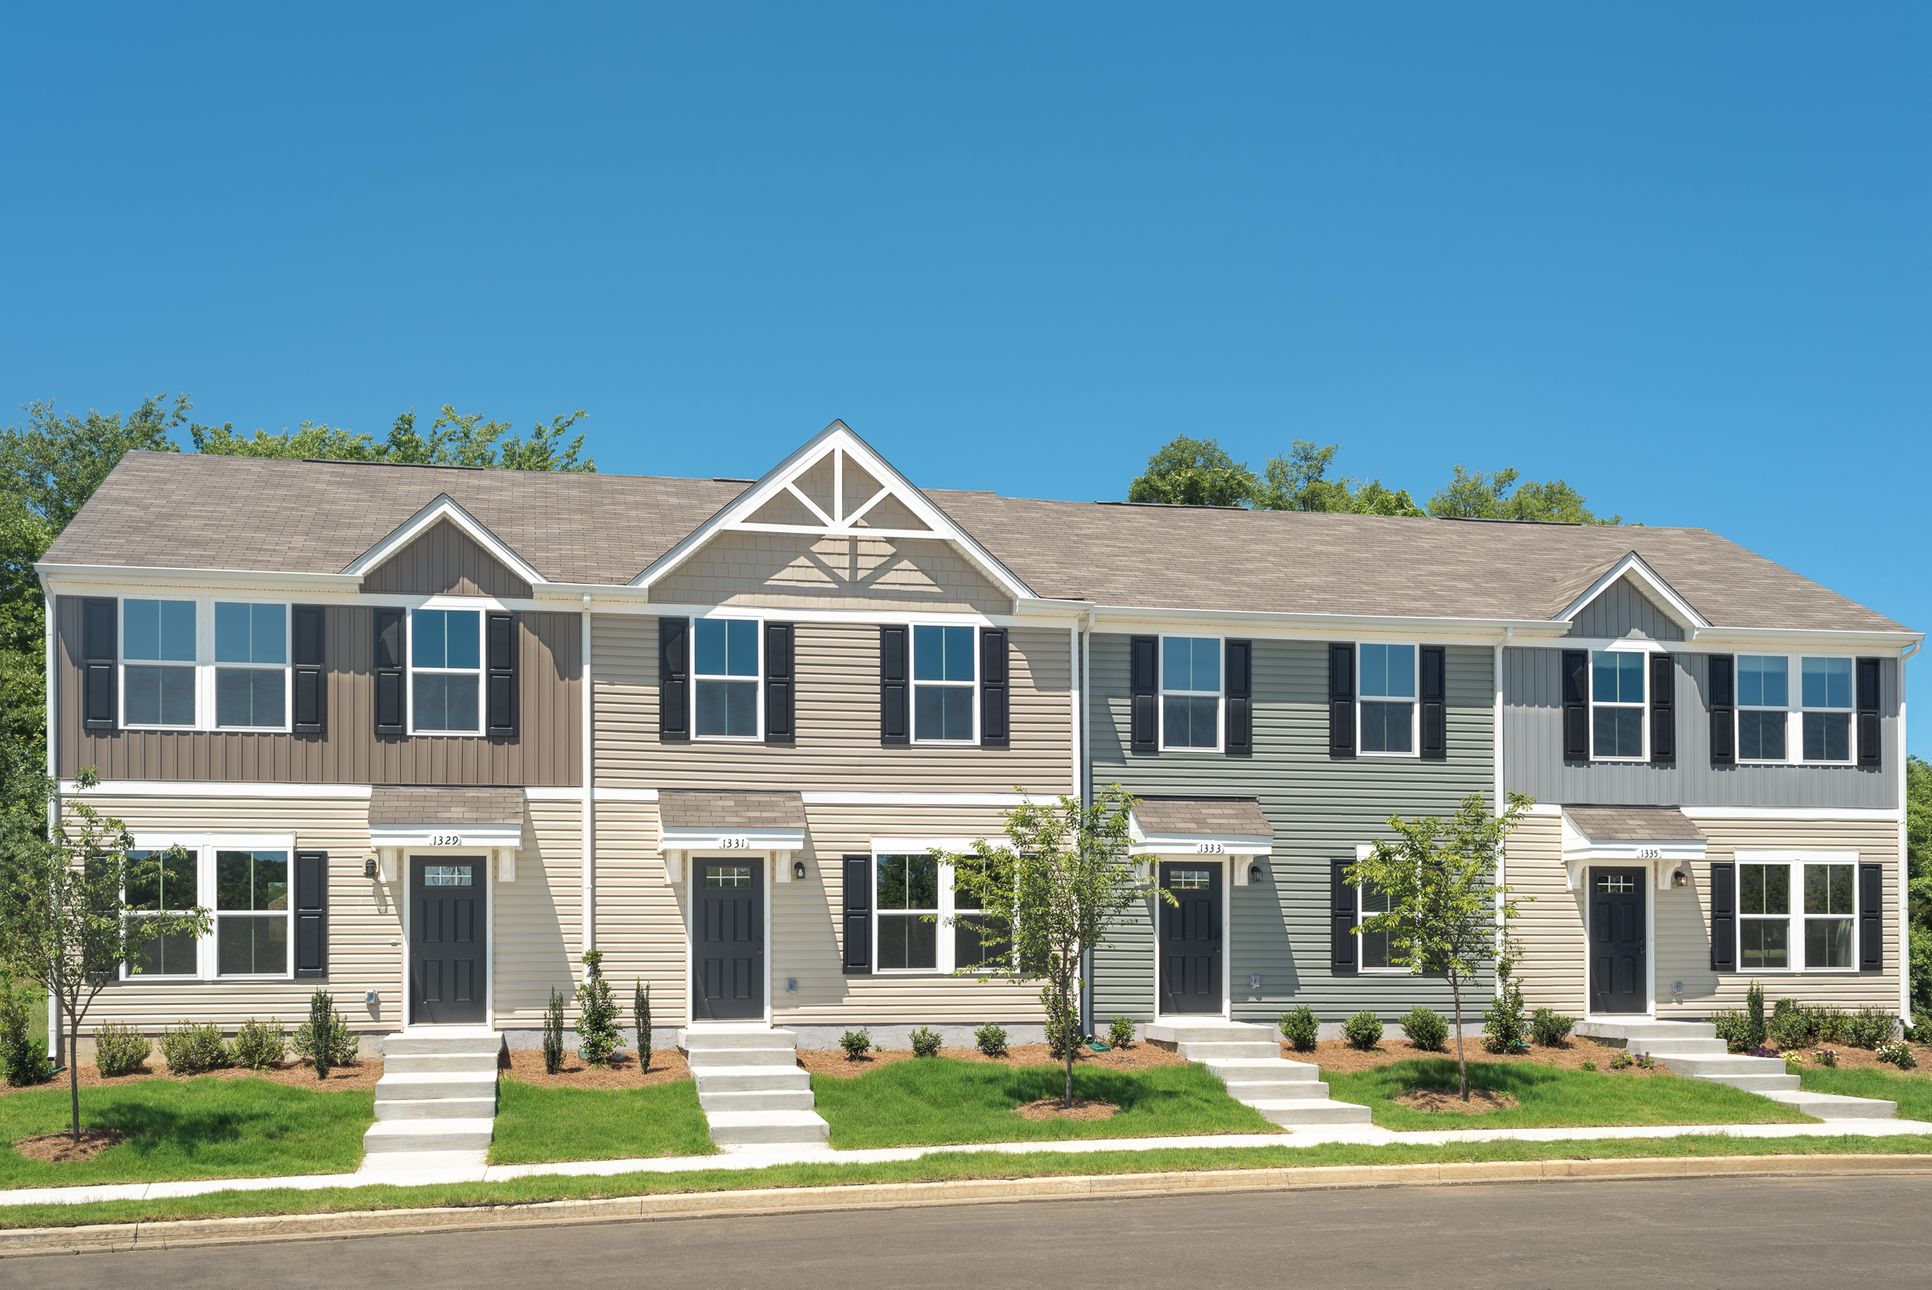 LAST CHANCE to own in the area's most affordable new townhome community